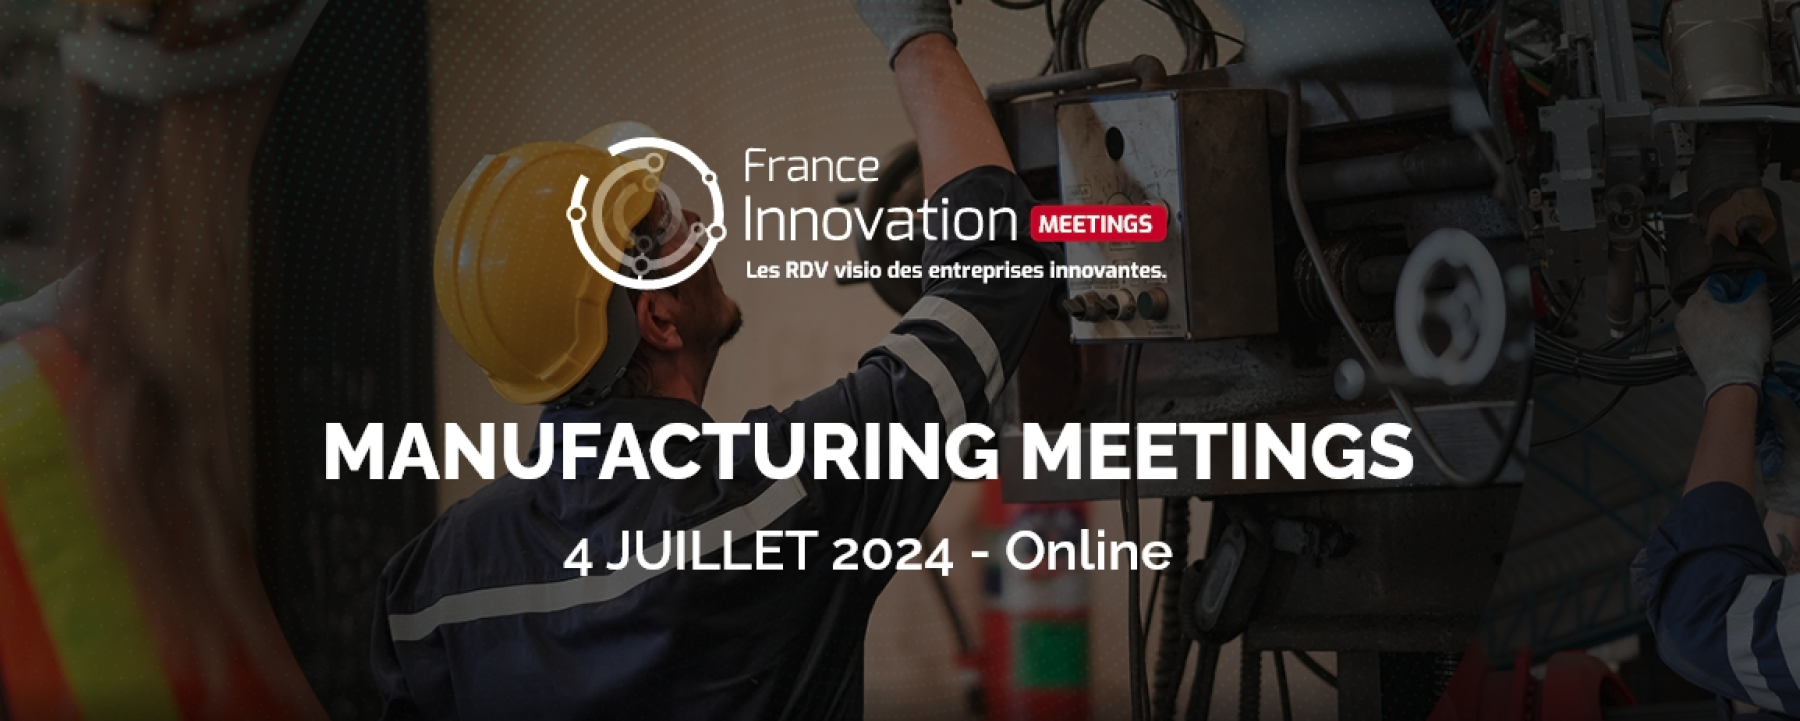 France Innovation : Meeting Manufacturing 